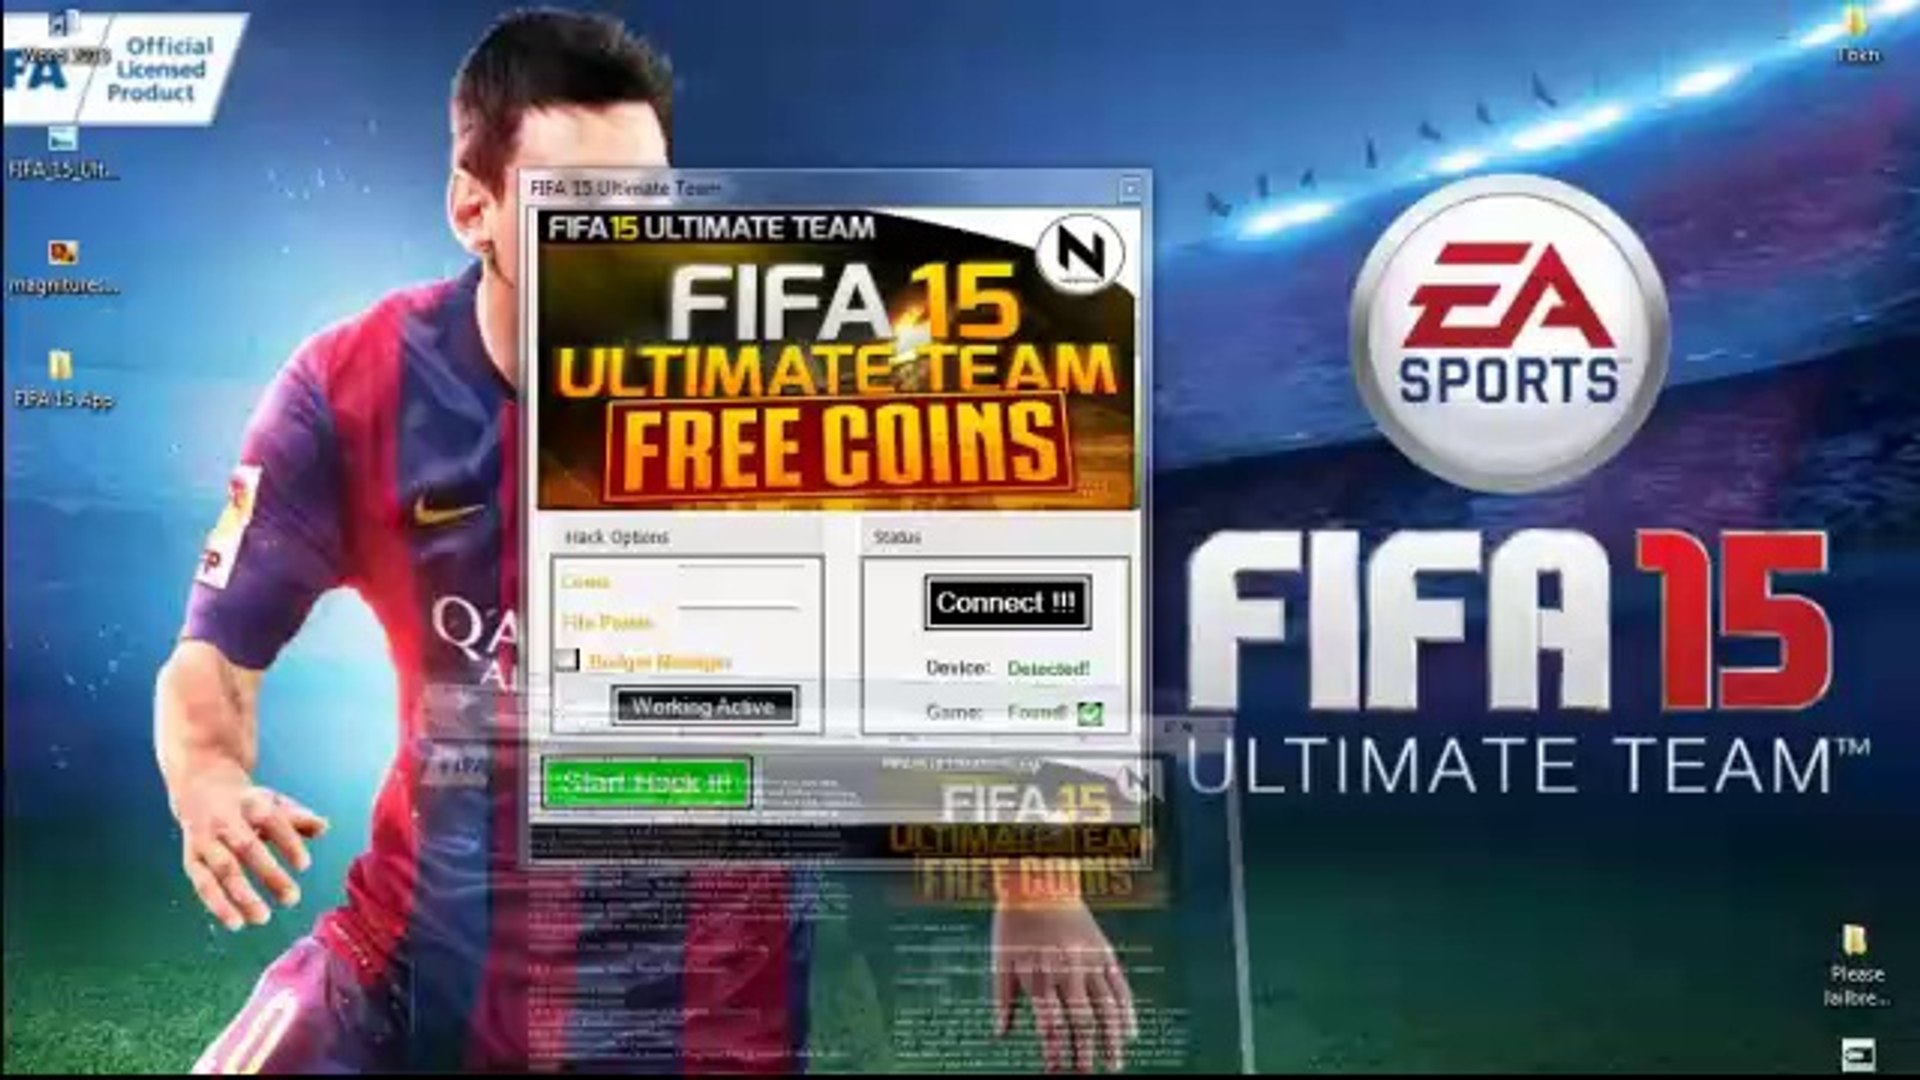 Get Free] FIFA 15 Ultimate Team Hack Cheats Unlimited Fifa Points and Coins  - video Dailymotion